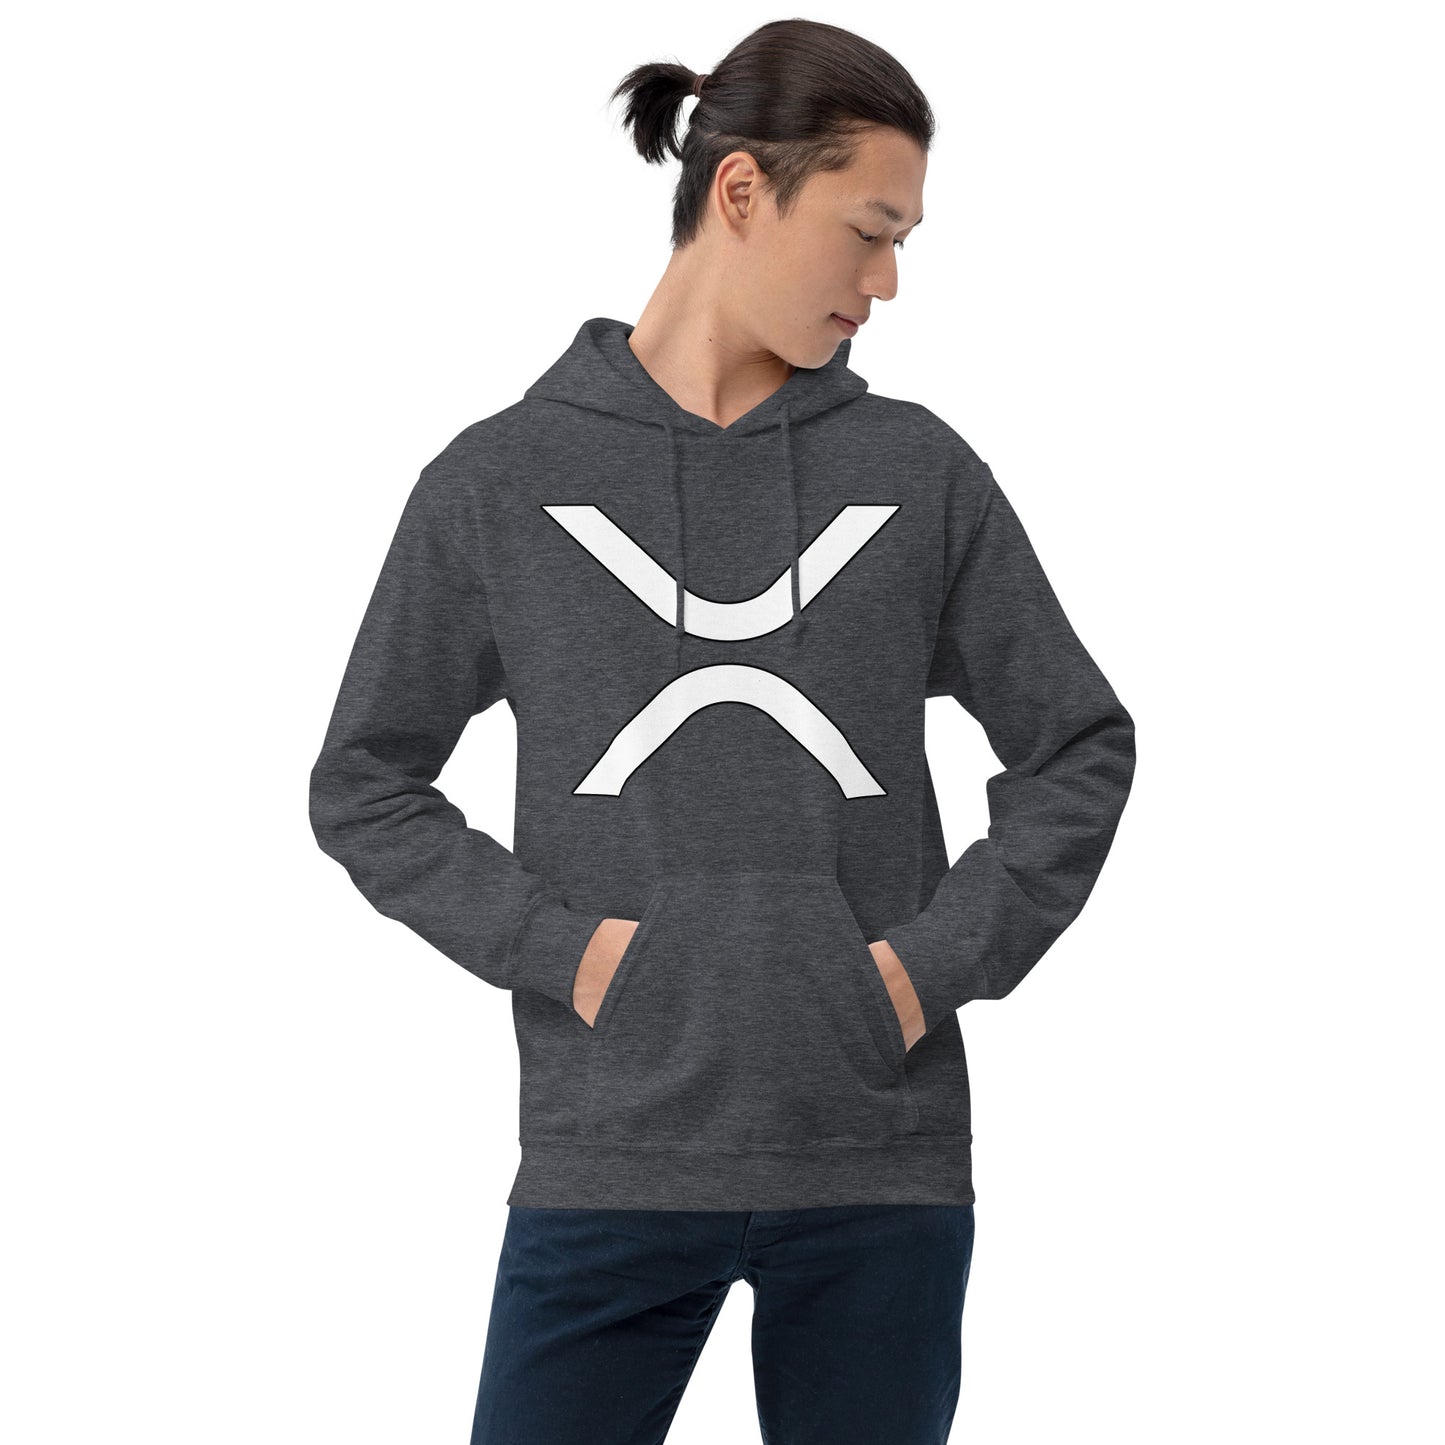 Xrp Army Hoodie Classic